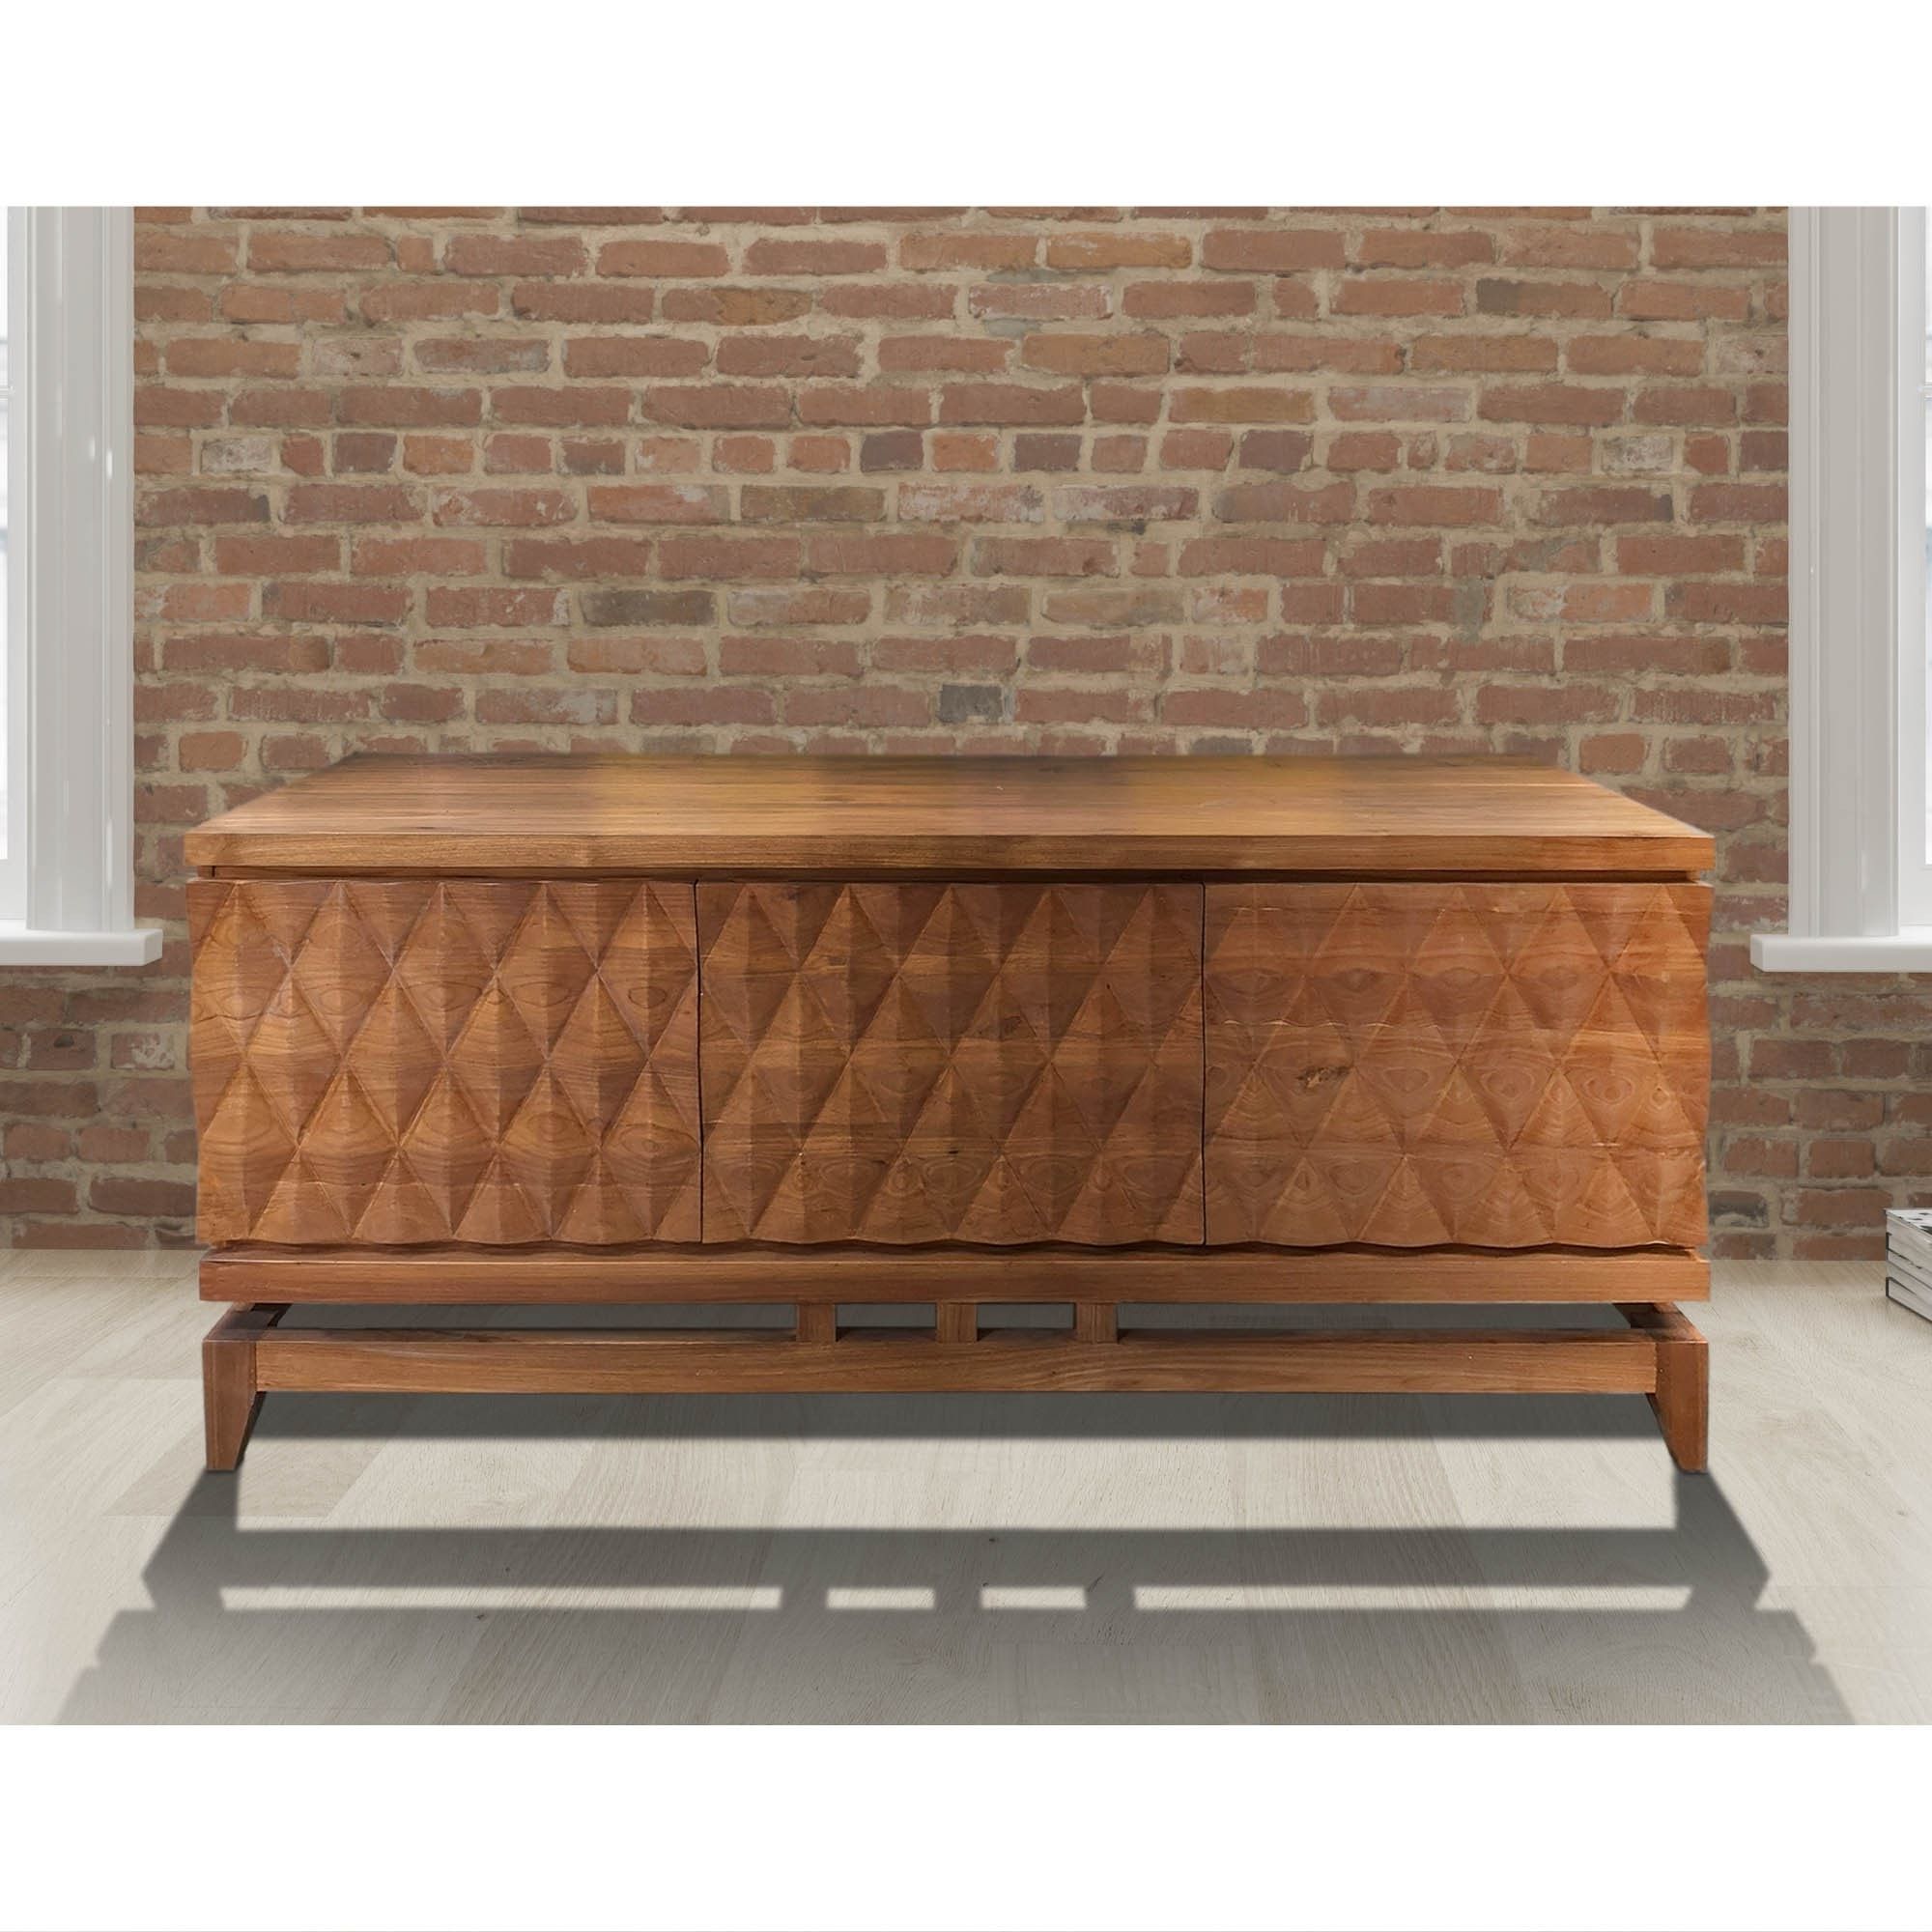 Large Geometric Sideboard | Large Wooden Sideboard | Modern Sideboard Throughout Geometric Sideboards (View 11 of 20)